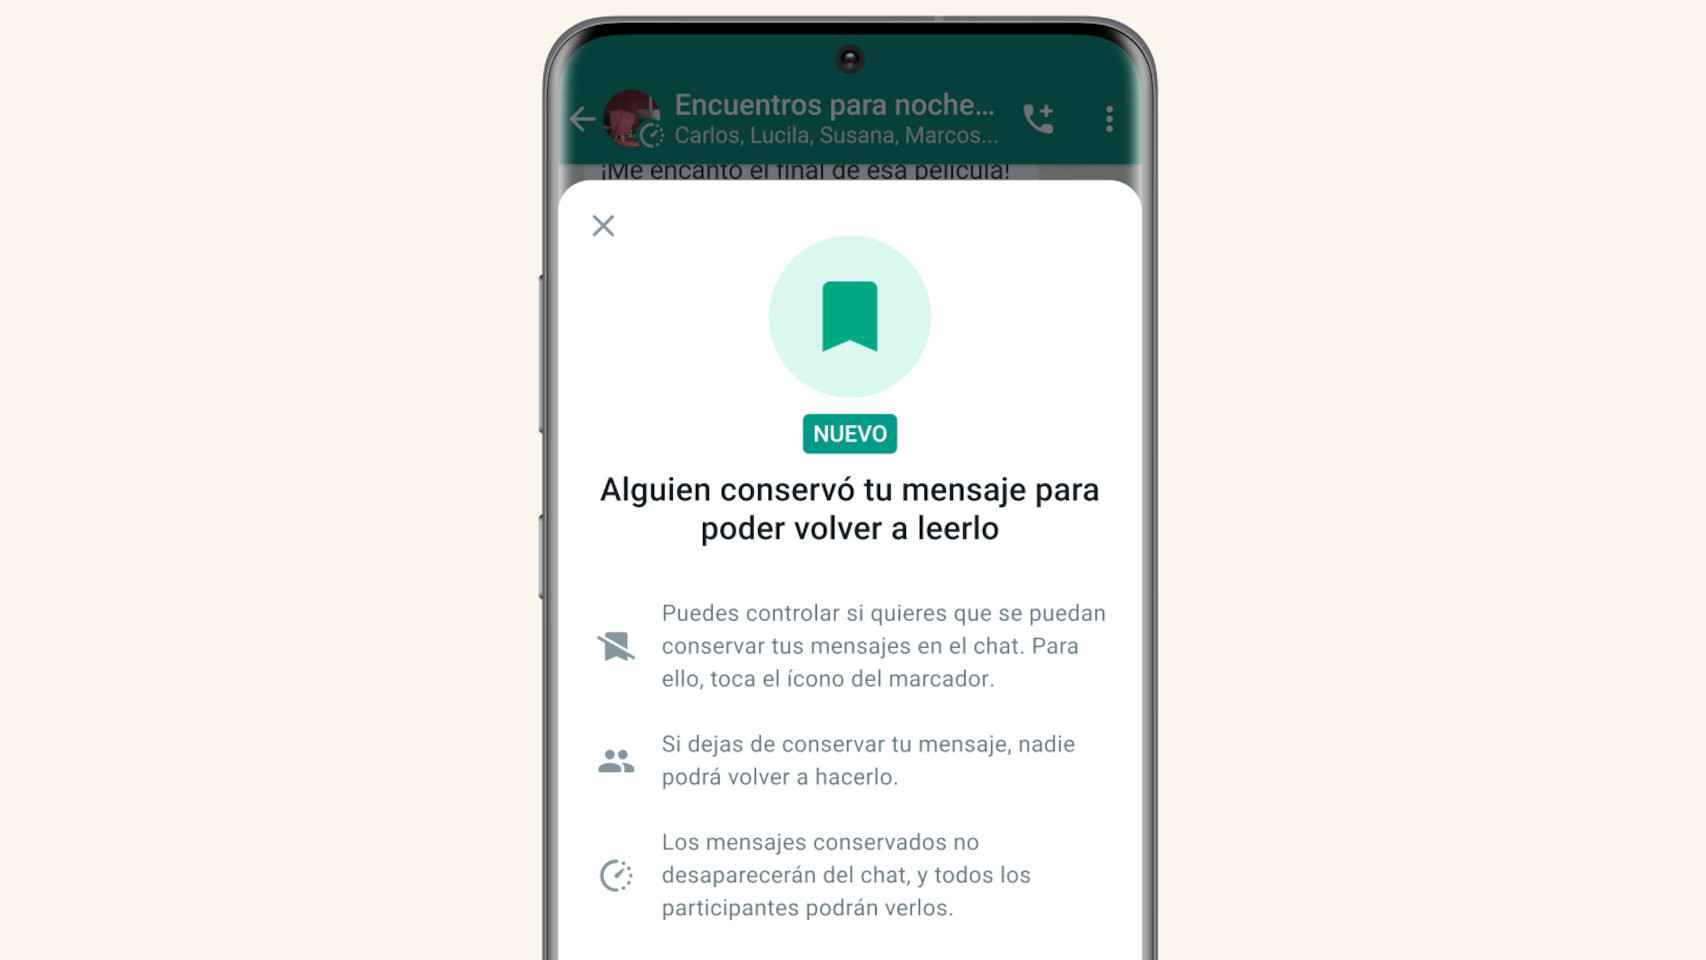 WhatsApp will notify us if someone tries to save one of our messages